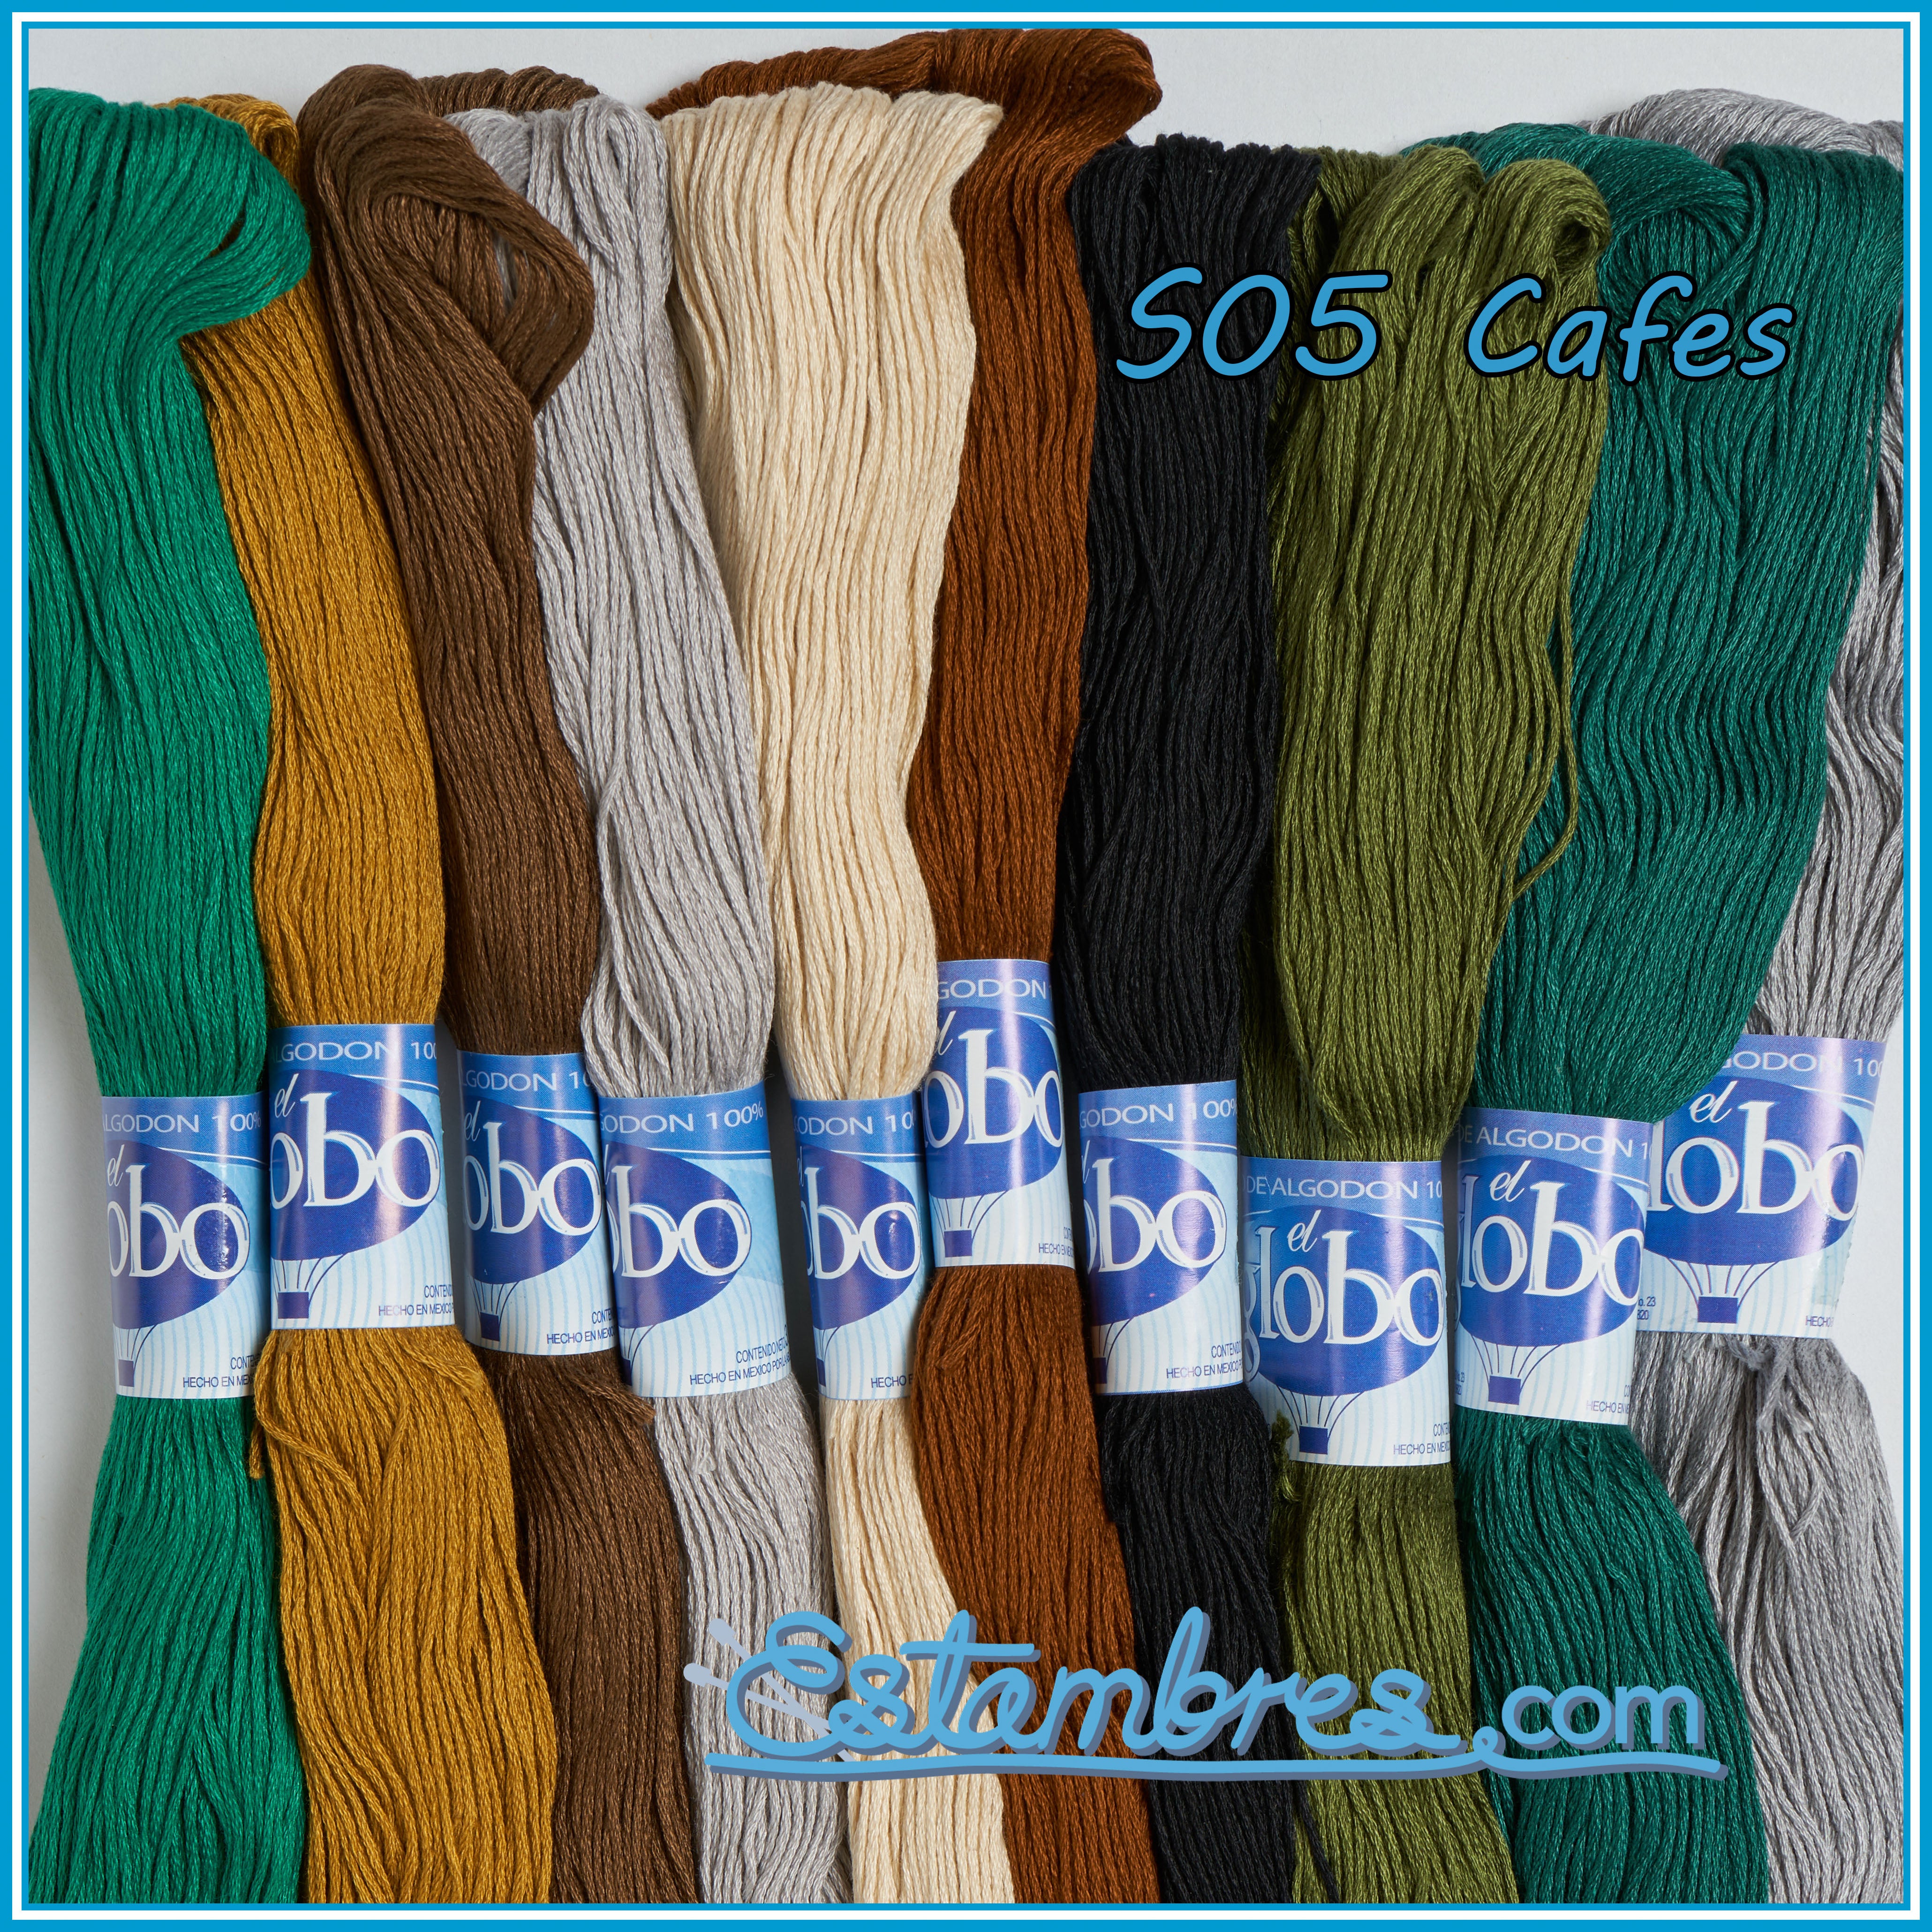 Only 16.25 usd for Hilo Vela El Globo Embroidery Thread Set - Bright Spring  Online at the Shop